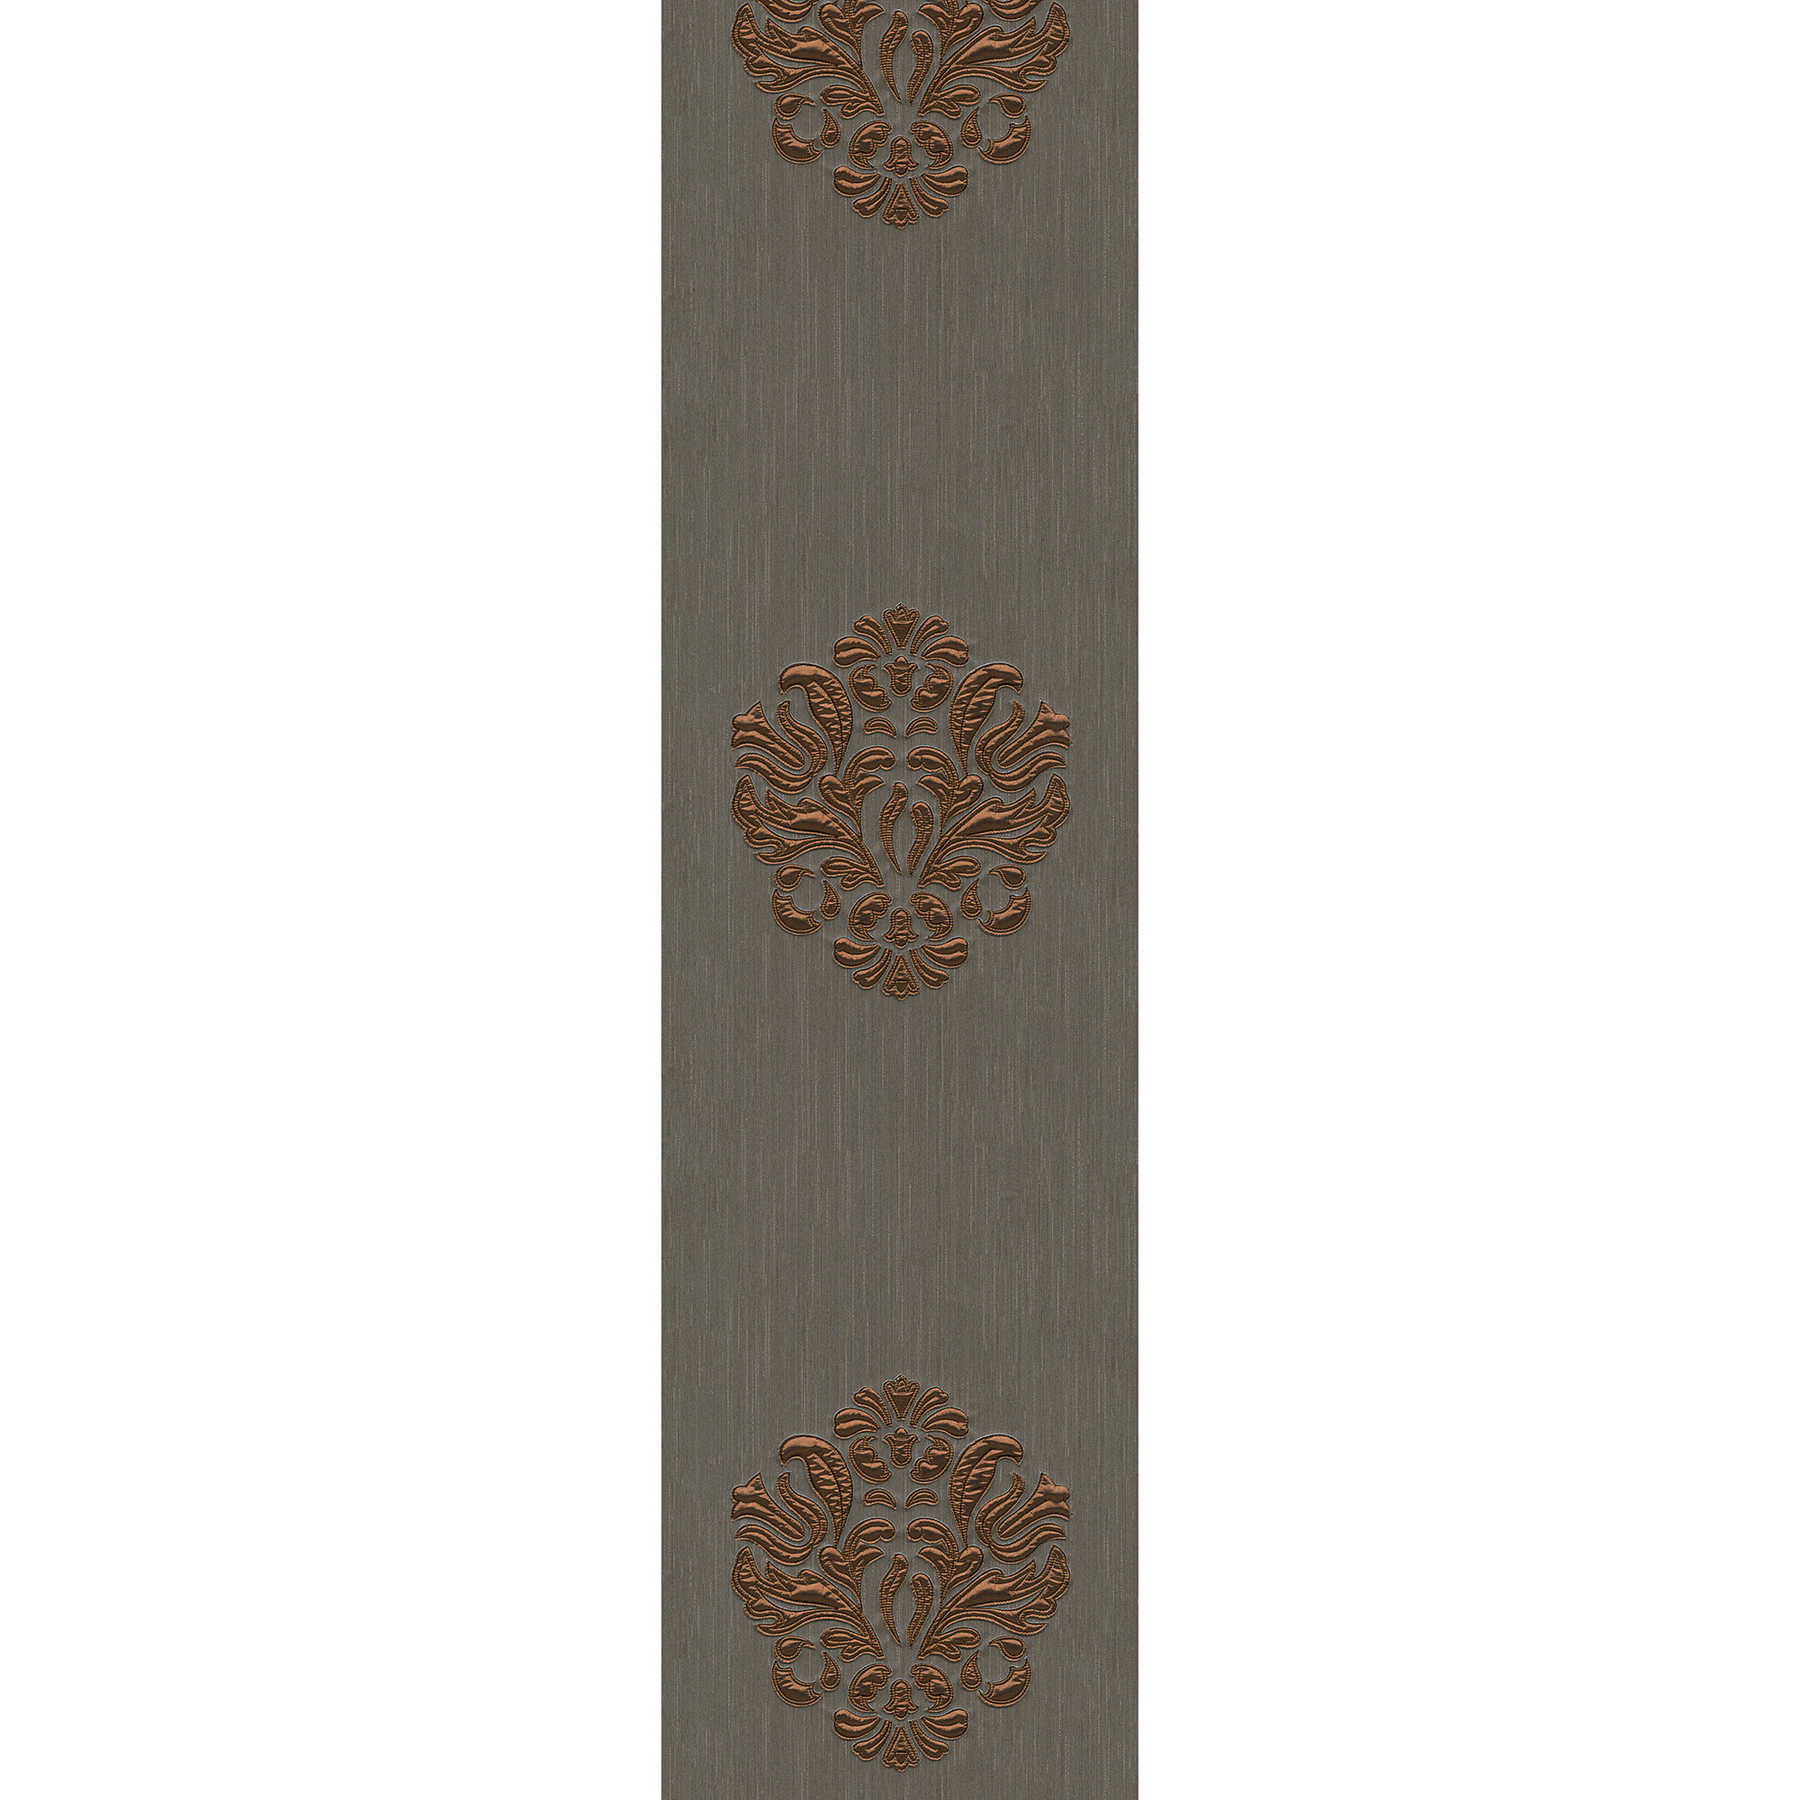         Luxurious ornament wallpaper with metallic effect - copper, brown
    